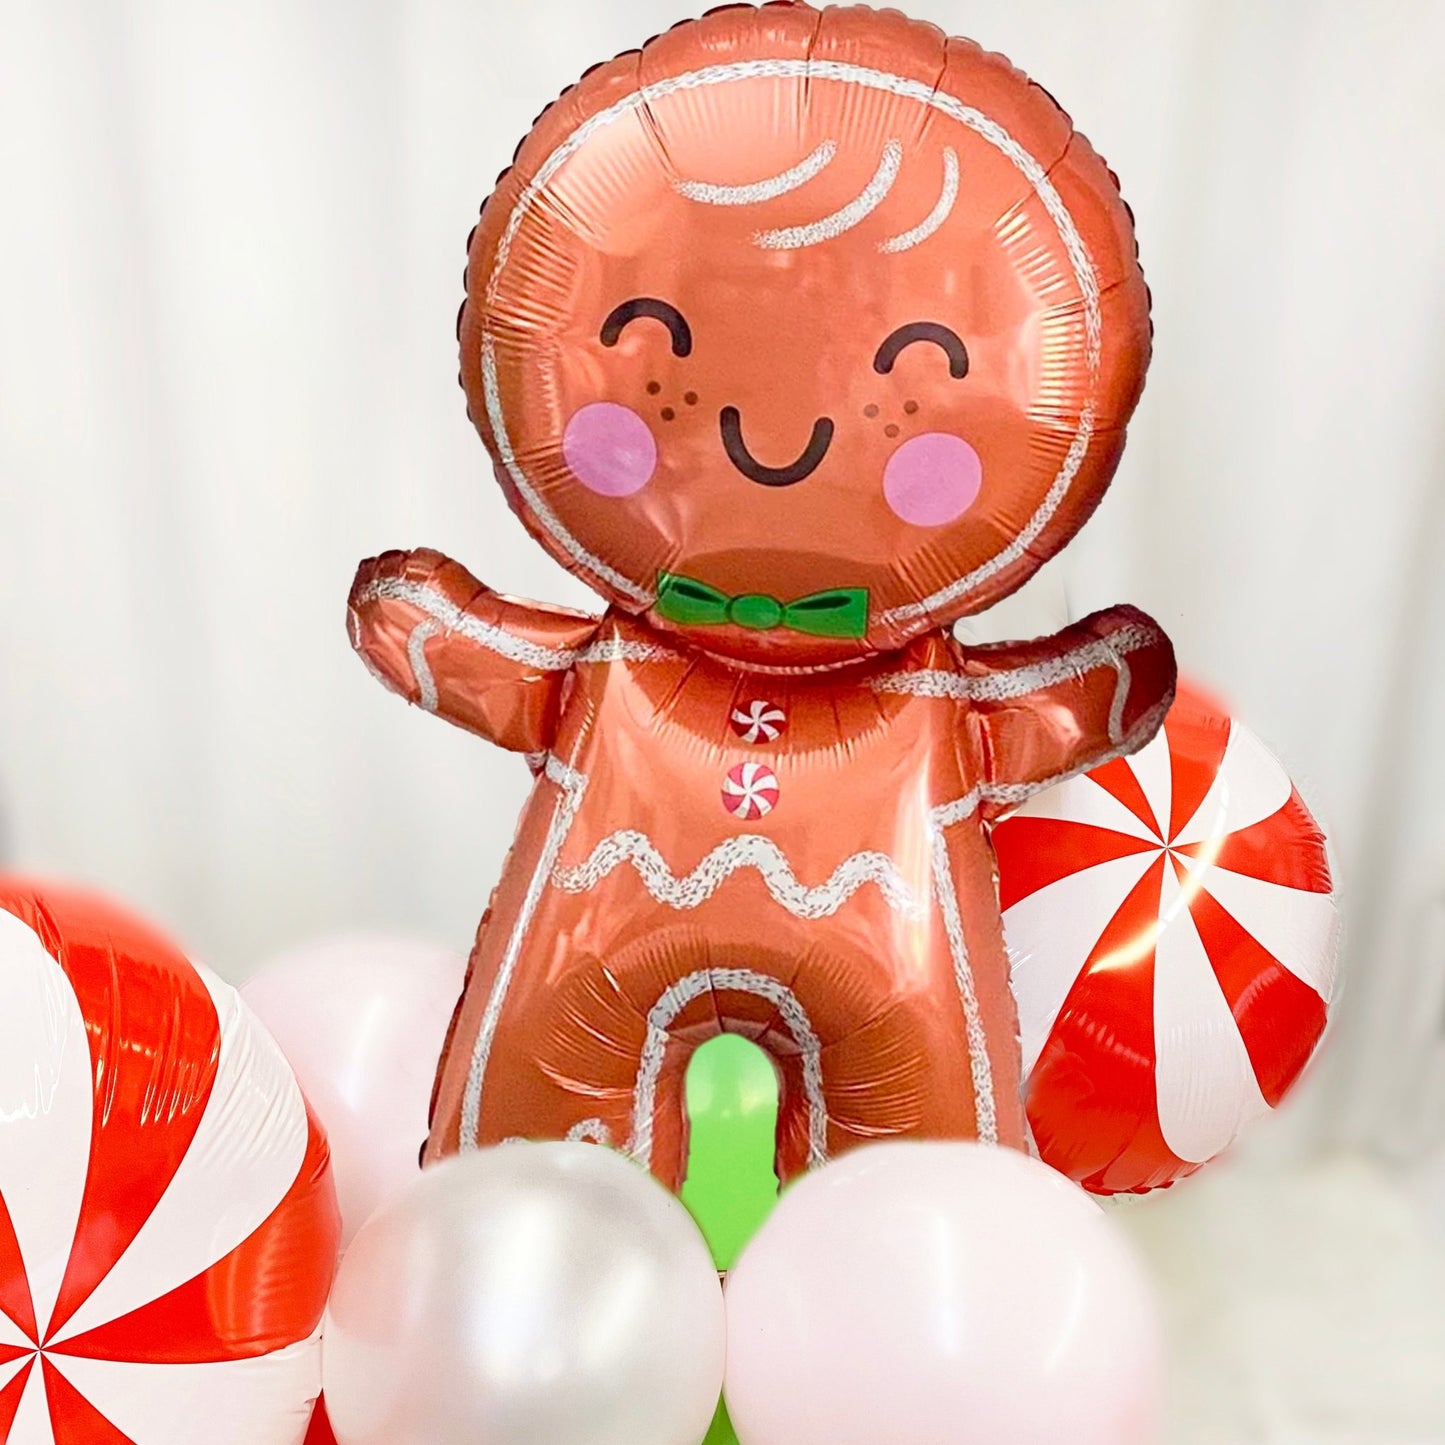 Gingerbread Man Balloon Bouquet Kit - Ellie's Party Supply